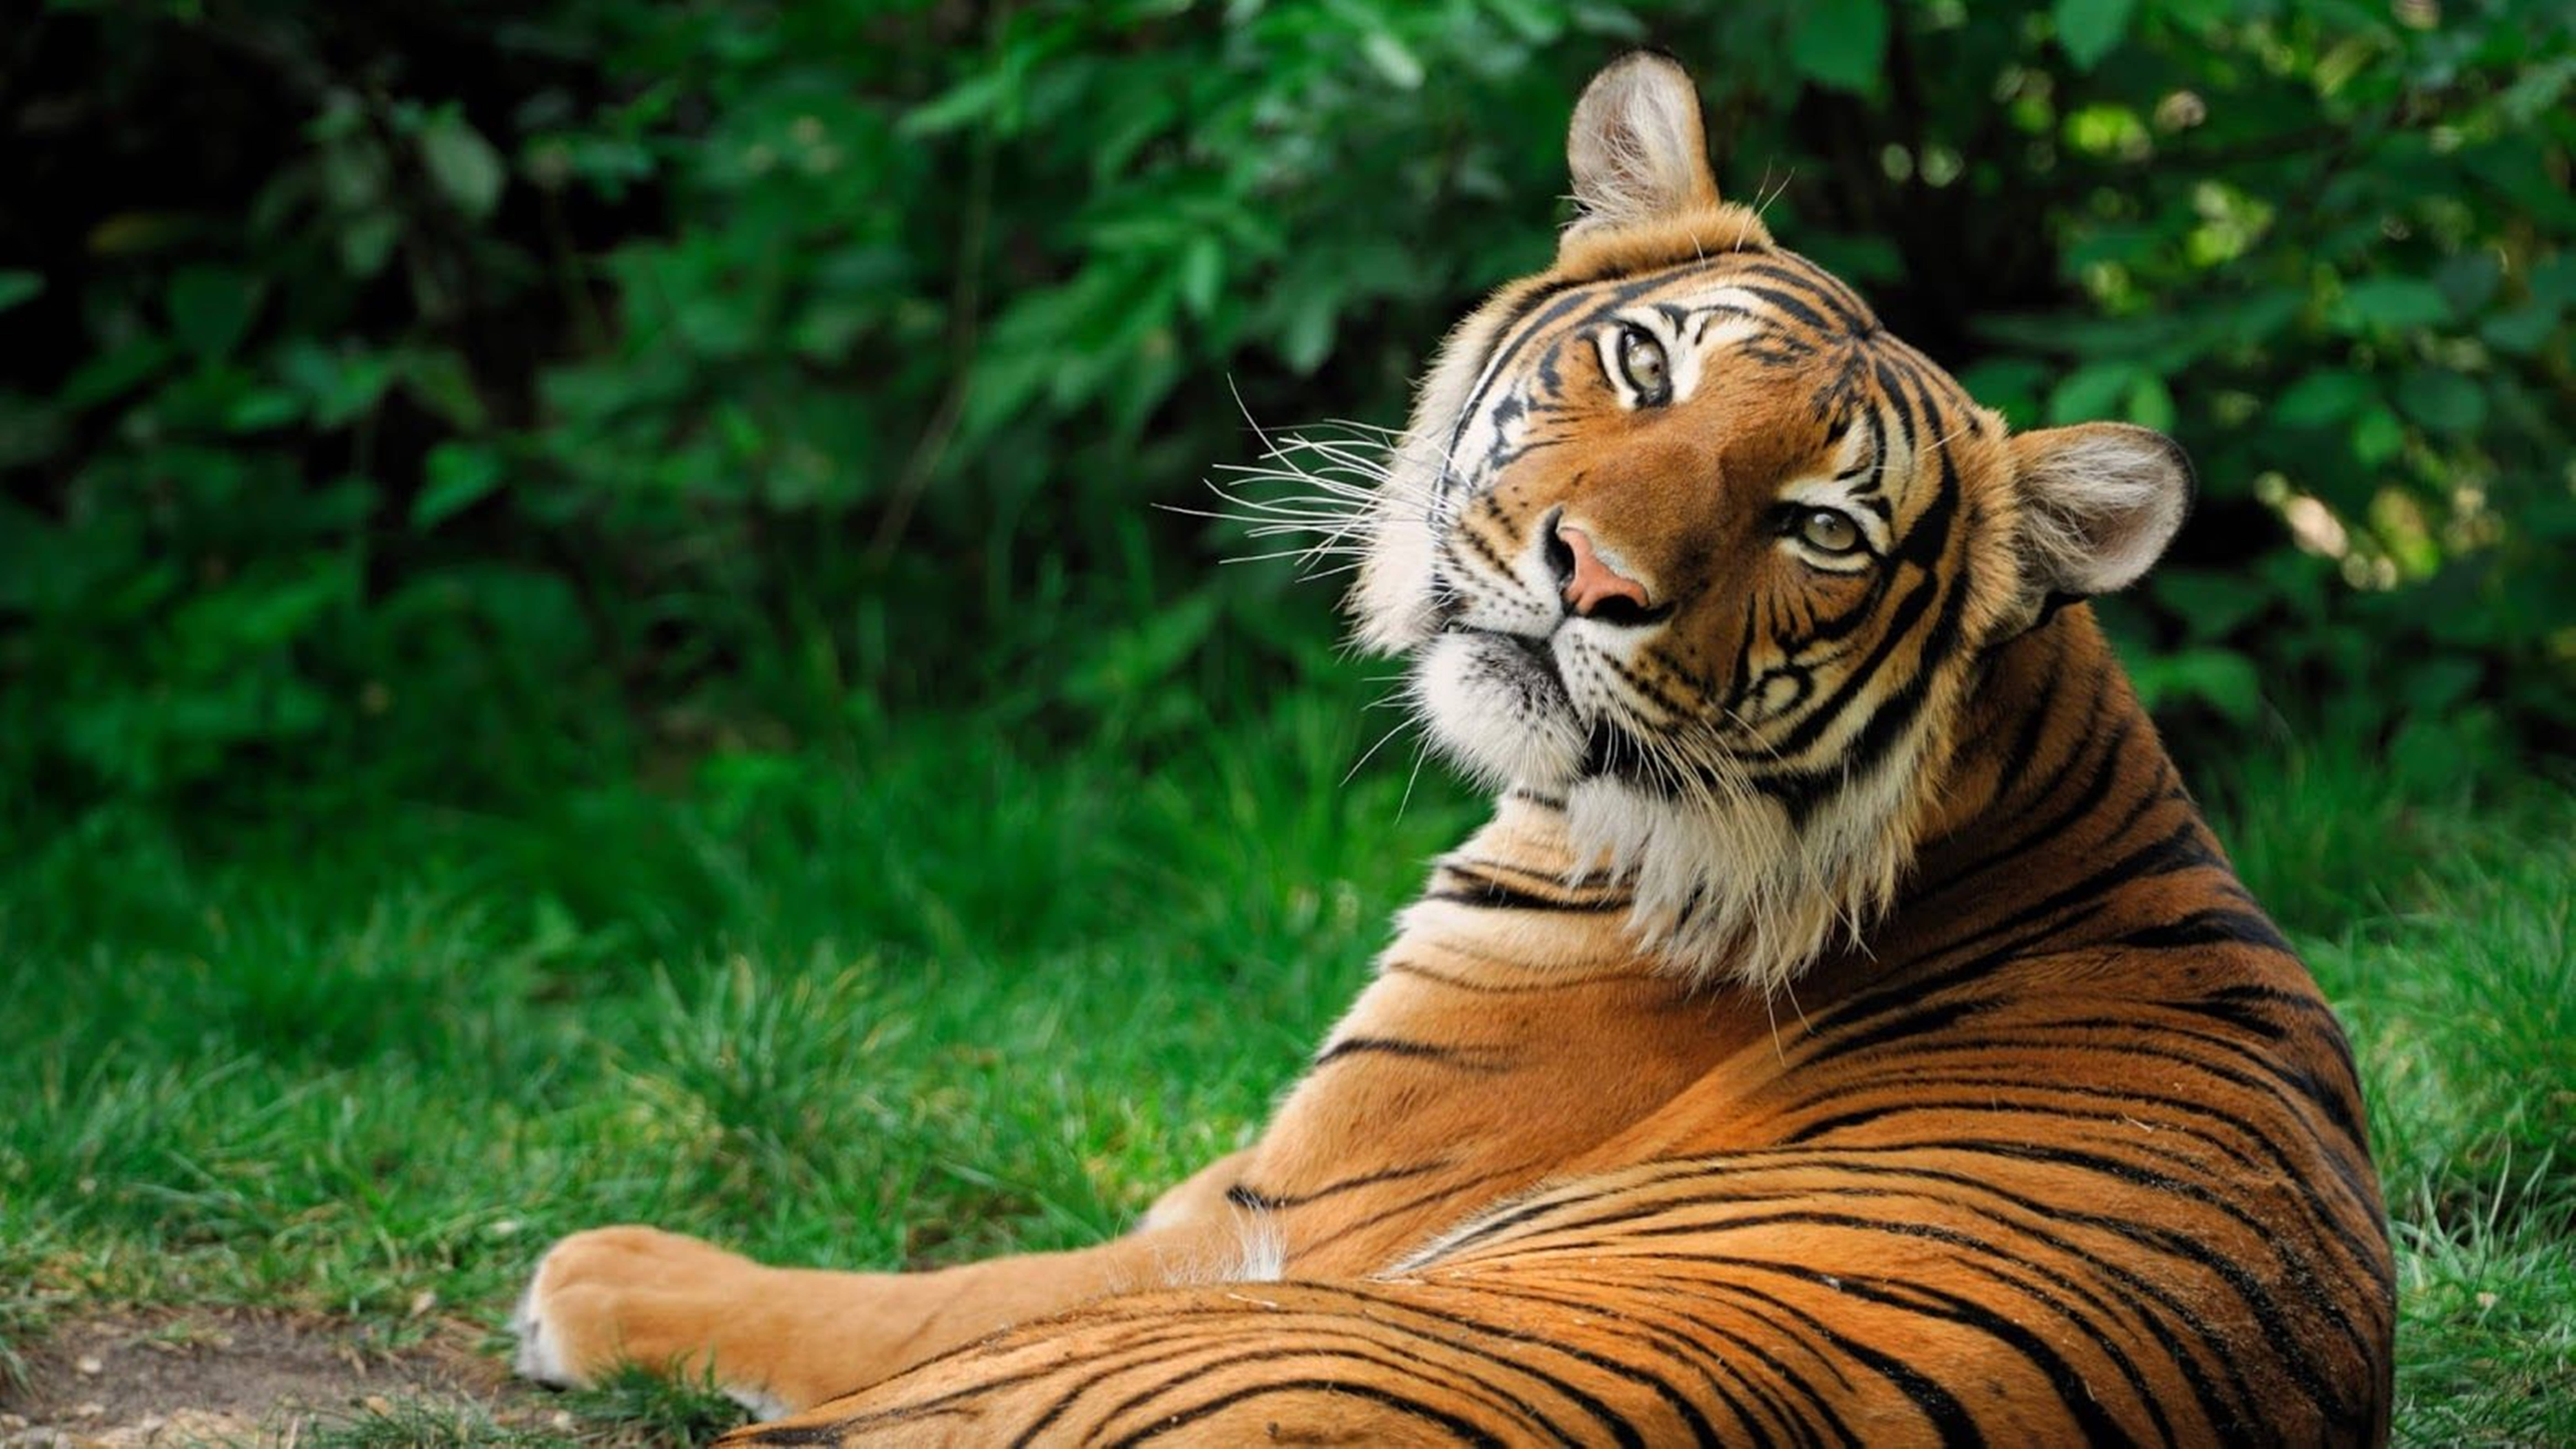 A Stunning Display Of An 8k Uhd Tiger Prowling Background